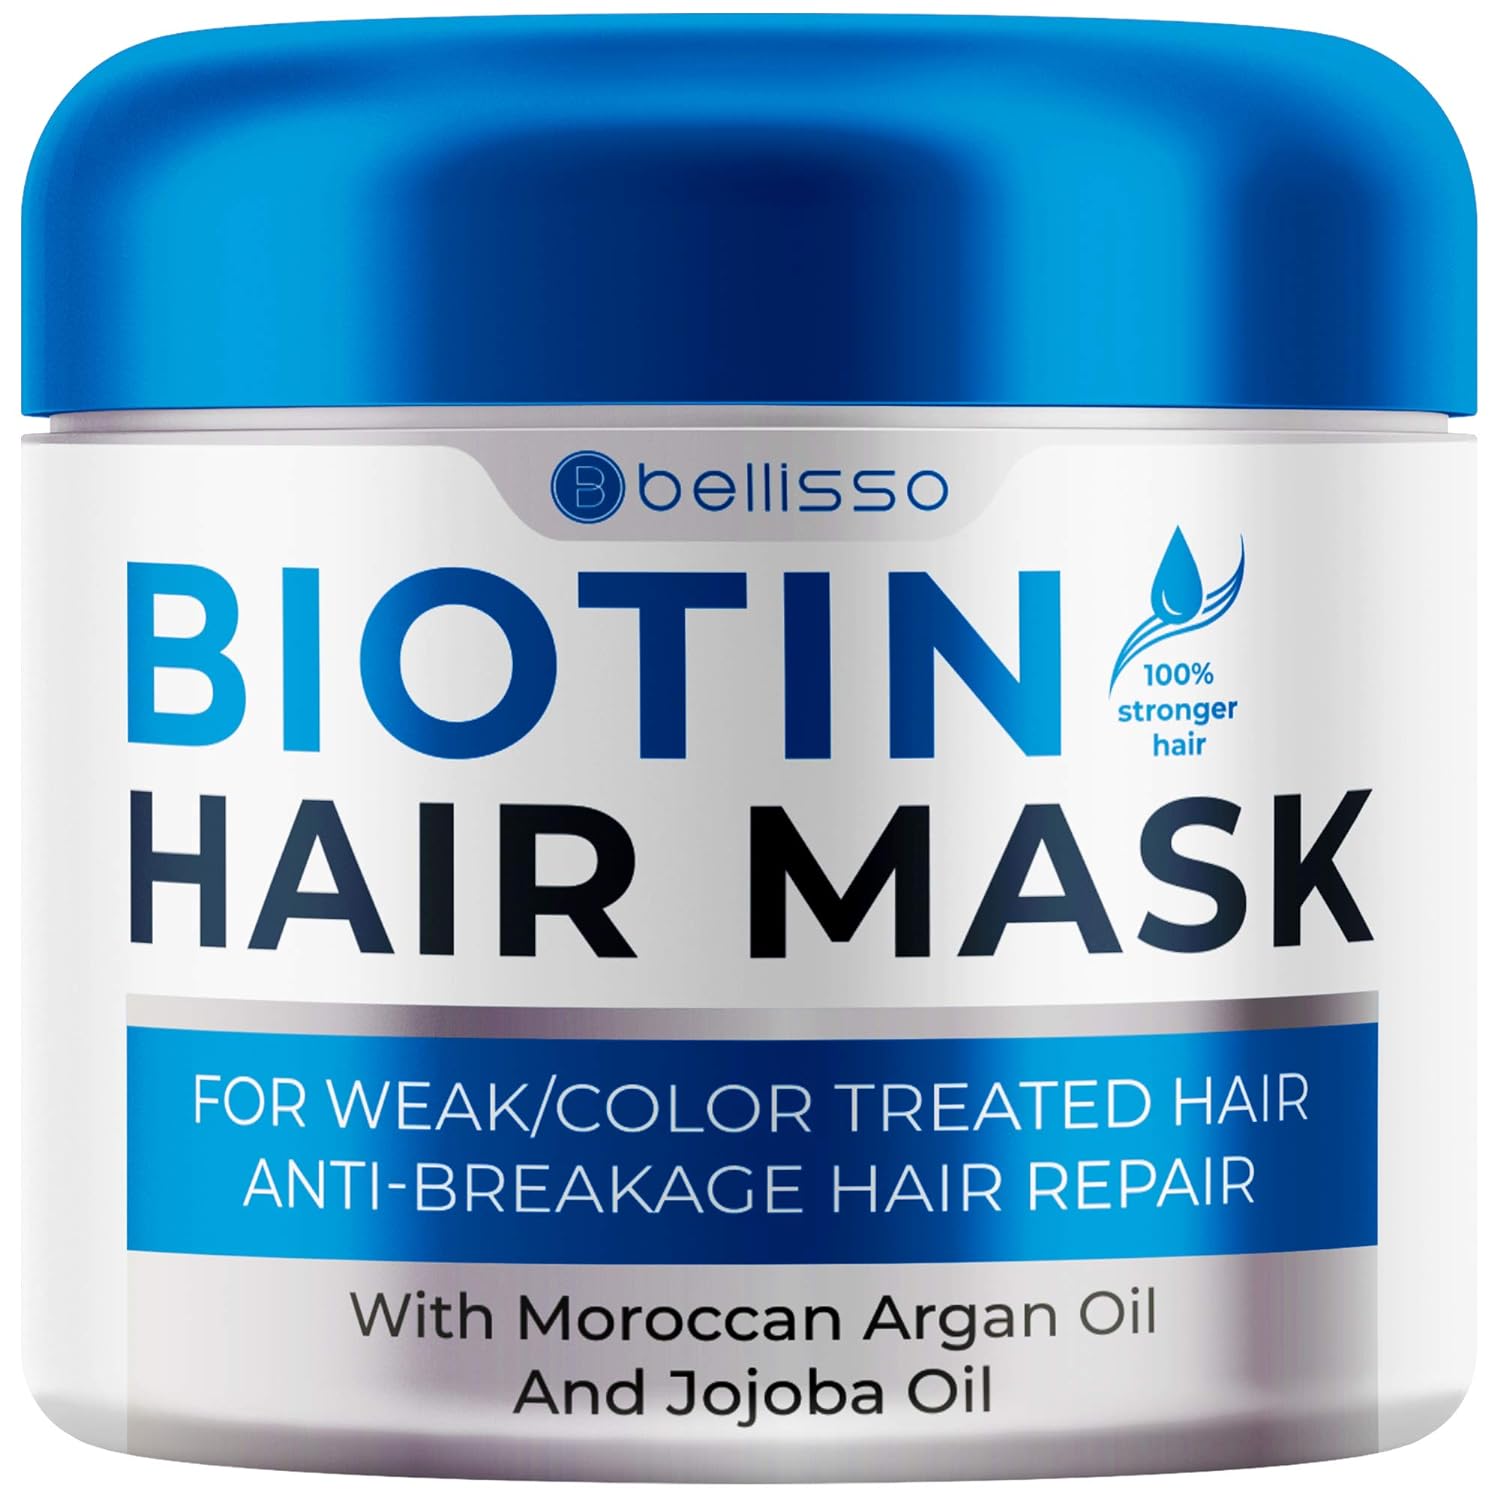 This mask is awesome! I dont use it after every wash but when I use it my hair is much smoother!